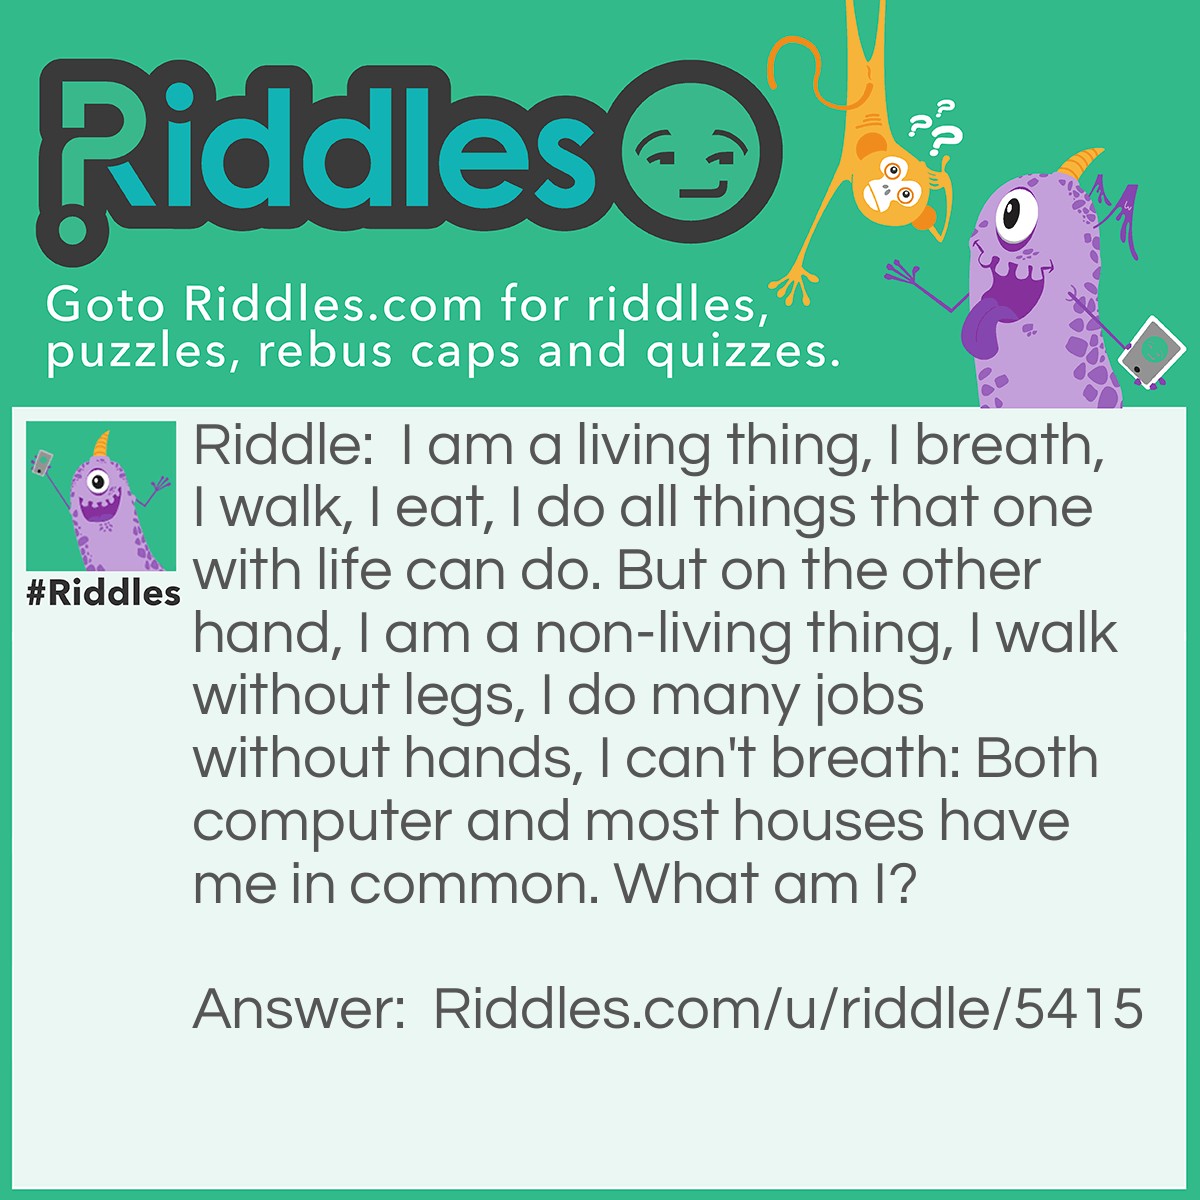 Riddle: I am a living thing, I breath, I walk, I eat, I do all things that one with life can do. But on the other hand, I am a non-living thing, I walk without legs, I do many jobs without hands, I can't breath: Both computer and most houses have me in common. What am I? Answer: I am a mouse.